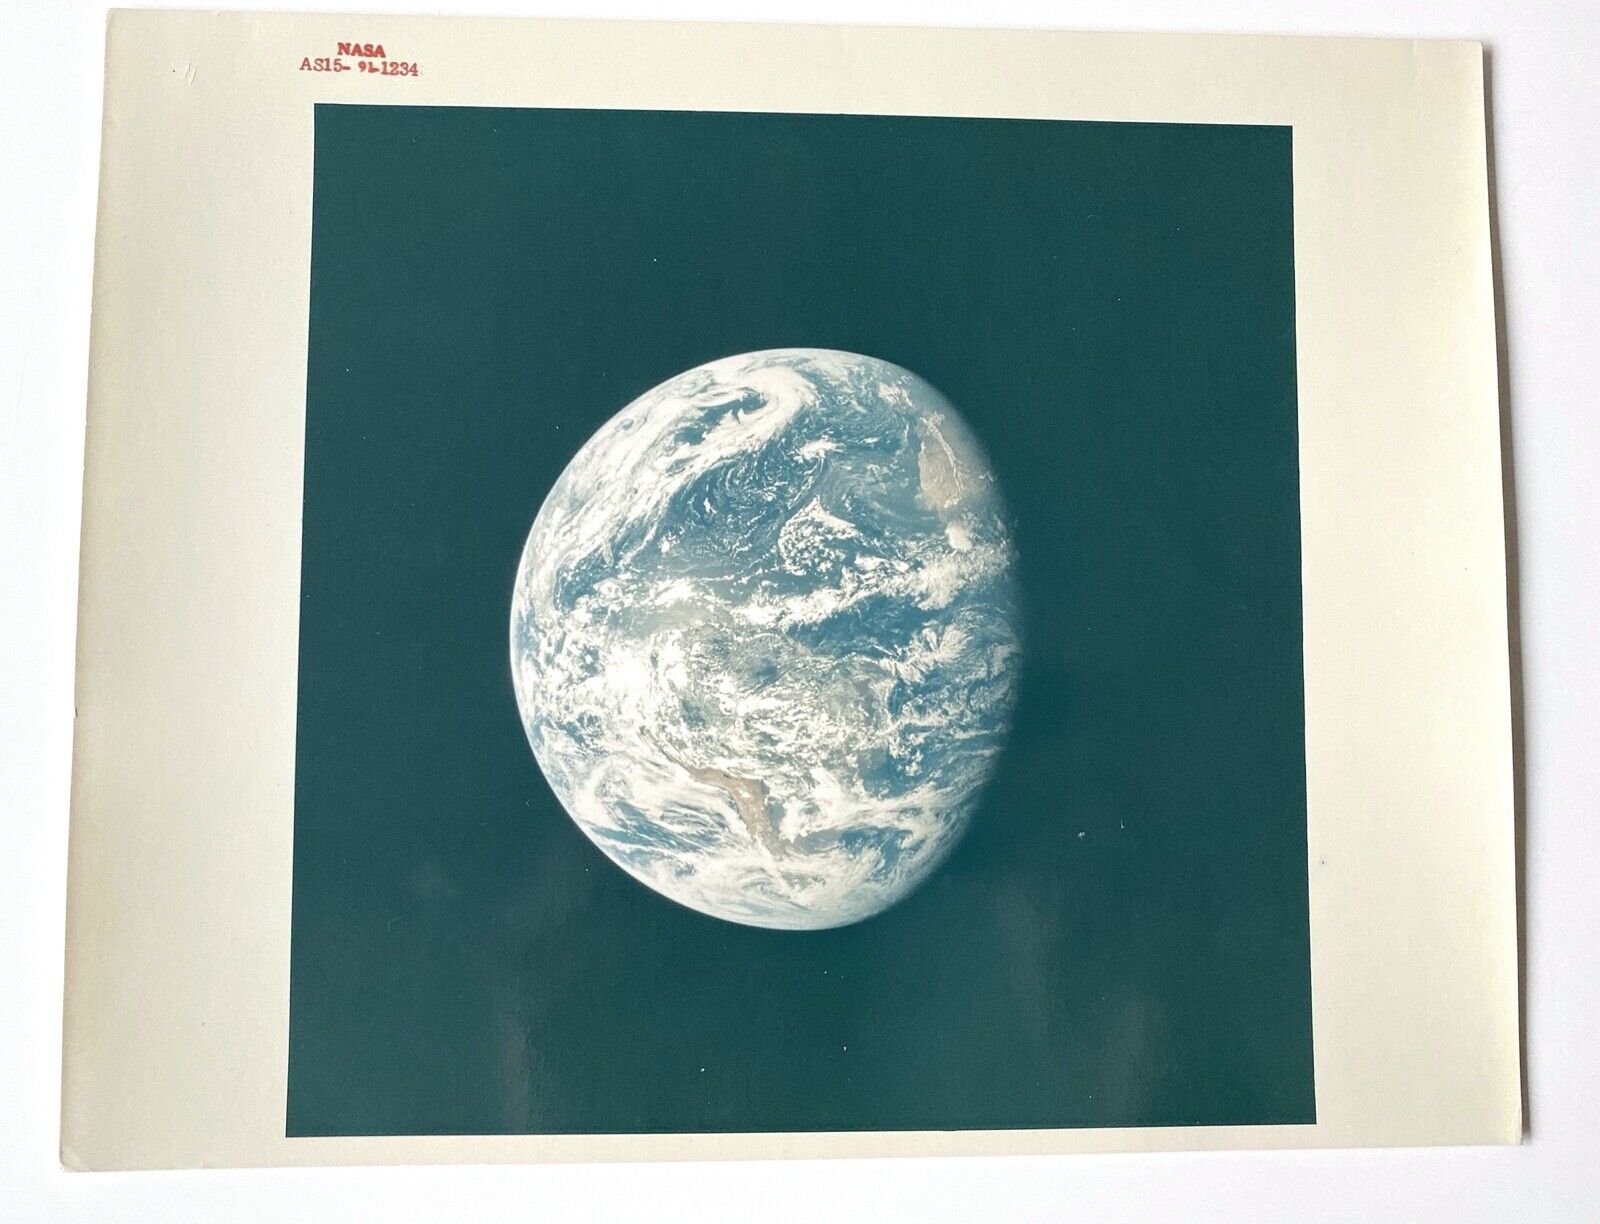 Vintage photo of NASA APOLLO 15 ICONIC VIEW OF EARTH 26 JULY 1971